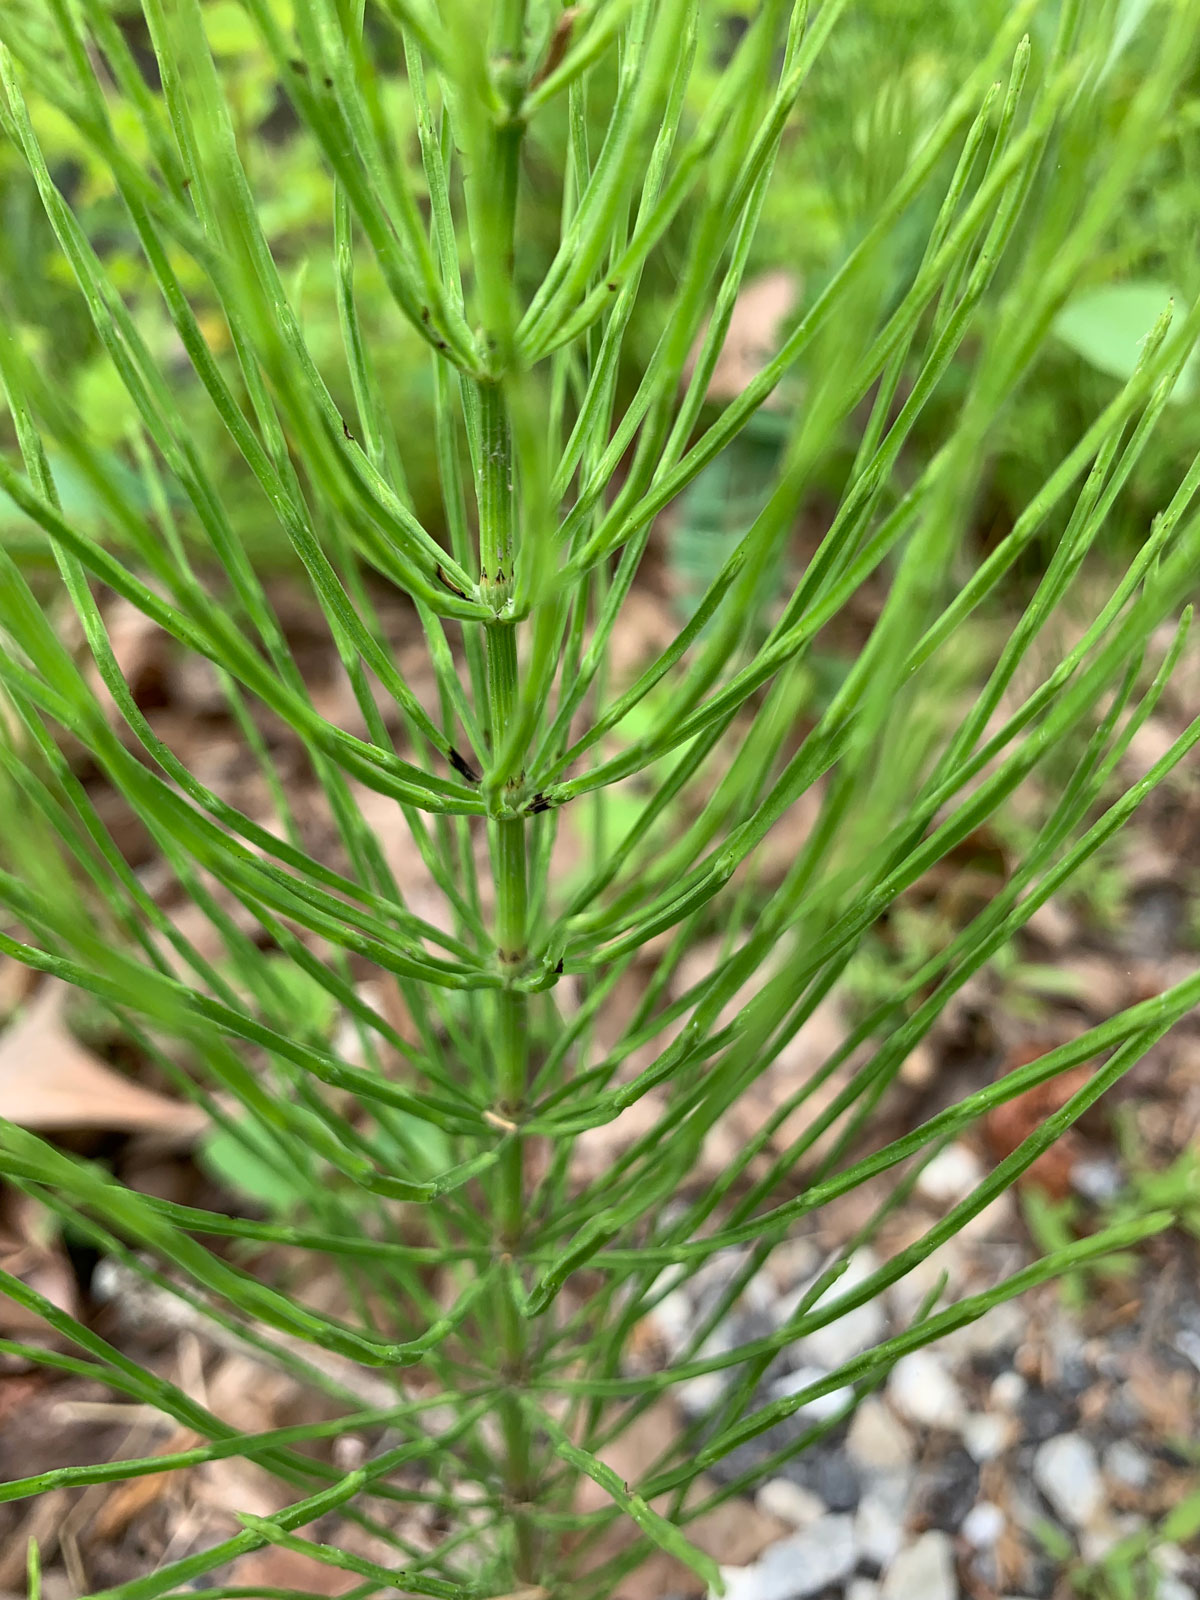 Green upright plant with feathery foliage